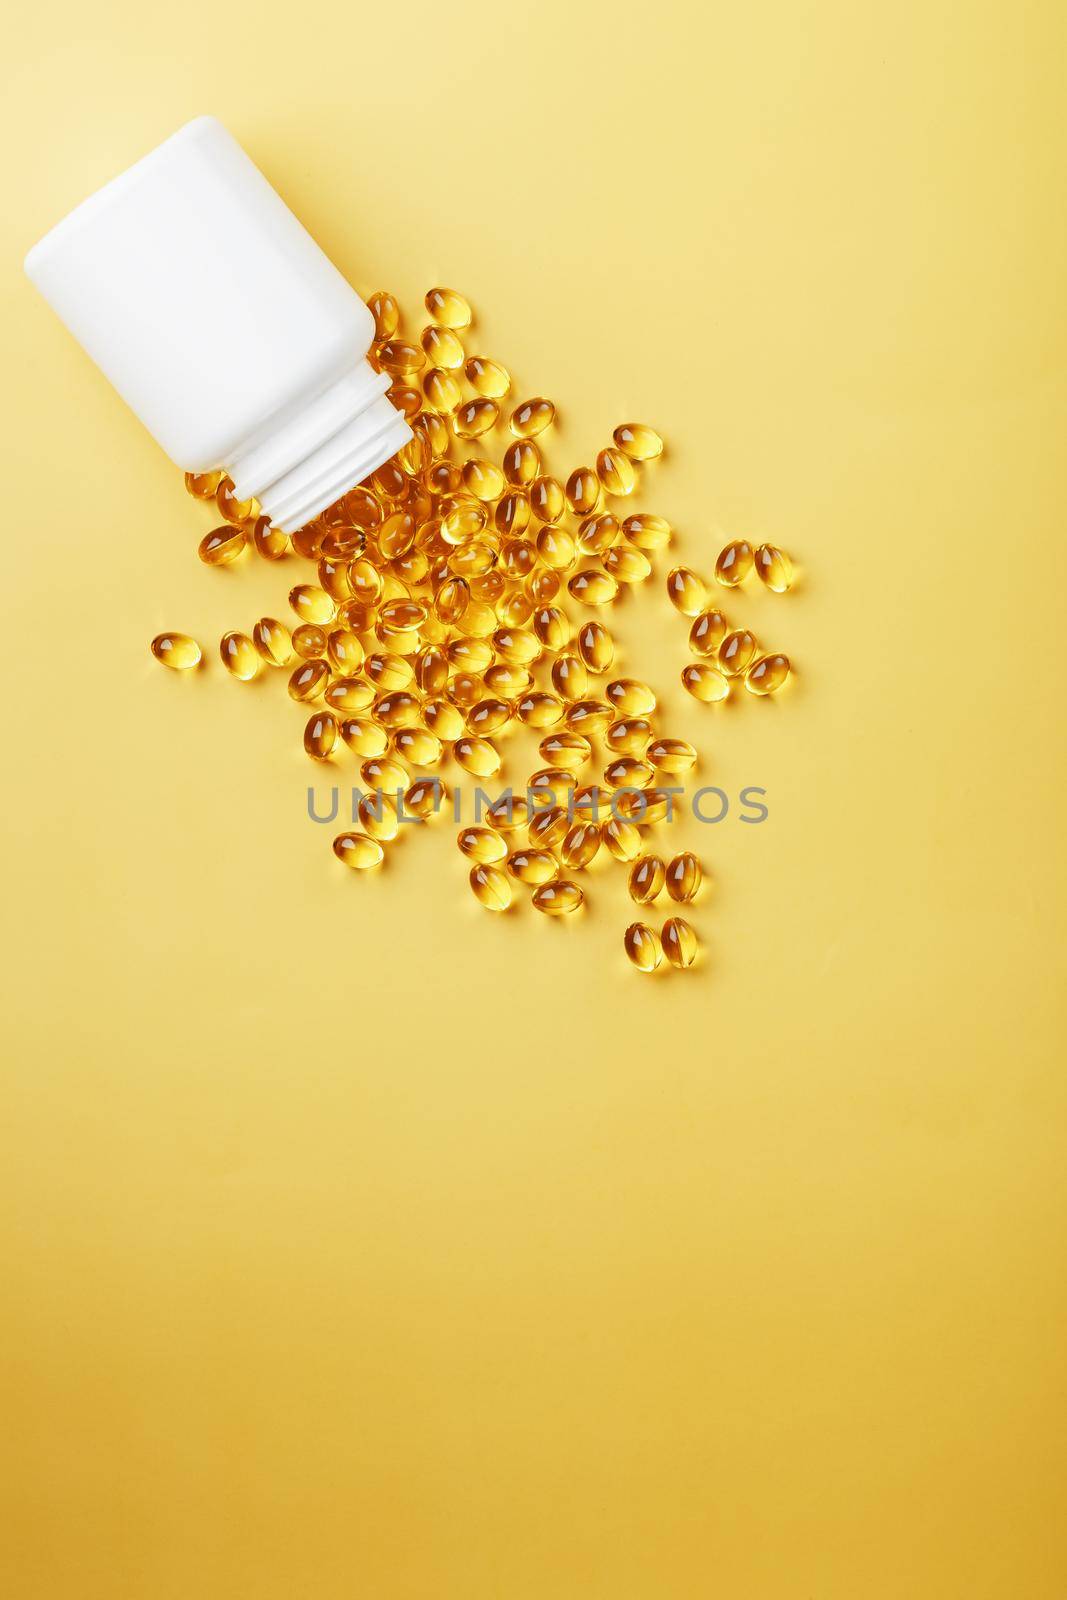 Golden Omega-3 fish oil capsules poured out of a jar on a yellow background. Free space